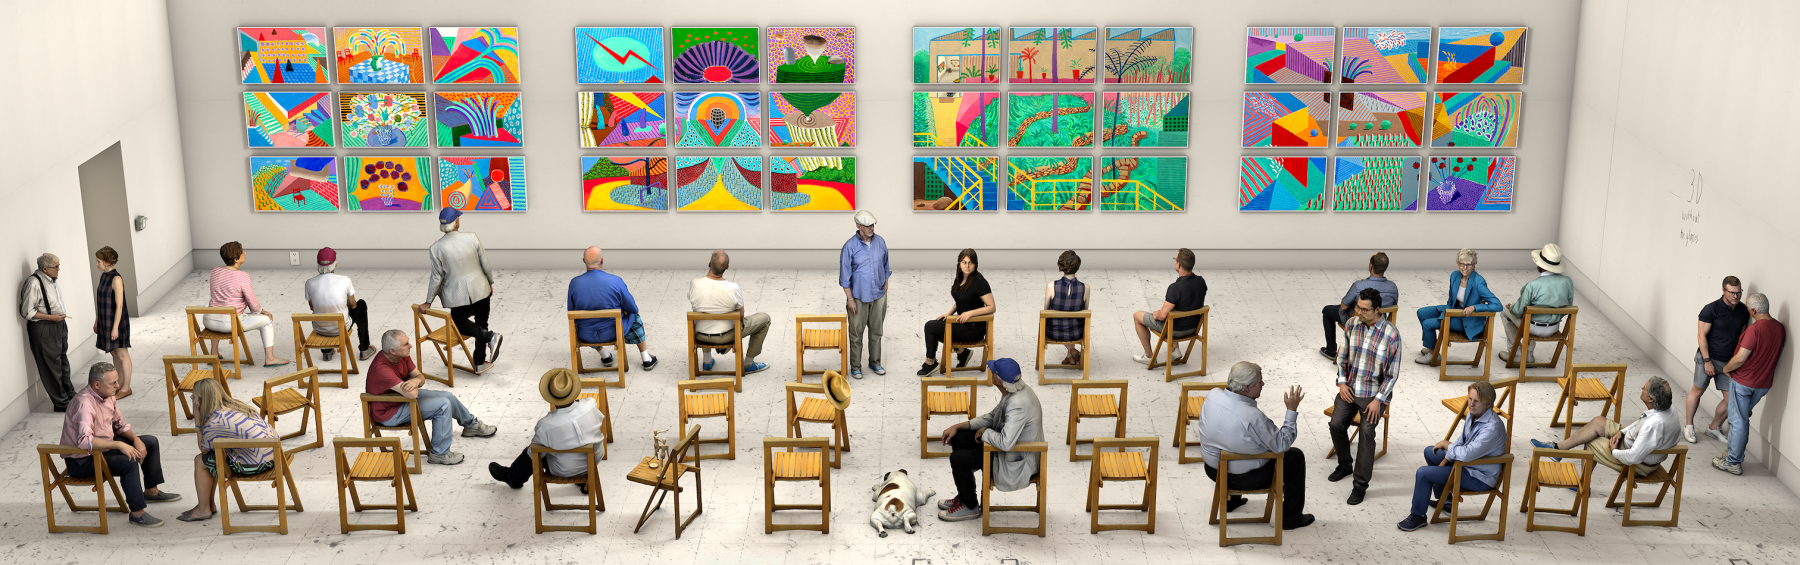 David Hockney
Pictures at an Exhibition,&amp;nbsp;2018/2021
Photographic drawing printed on paper
15 feet 7 inches x 50 feet (4.7 x 15.2 m)
Unique exhibition copy